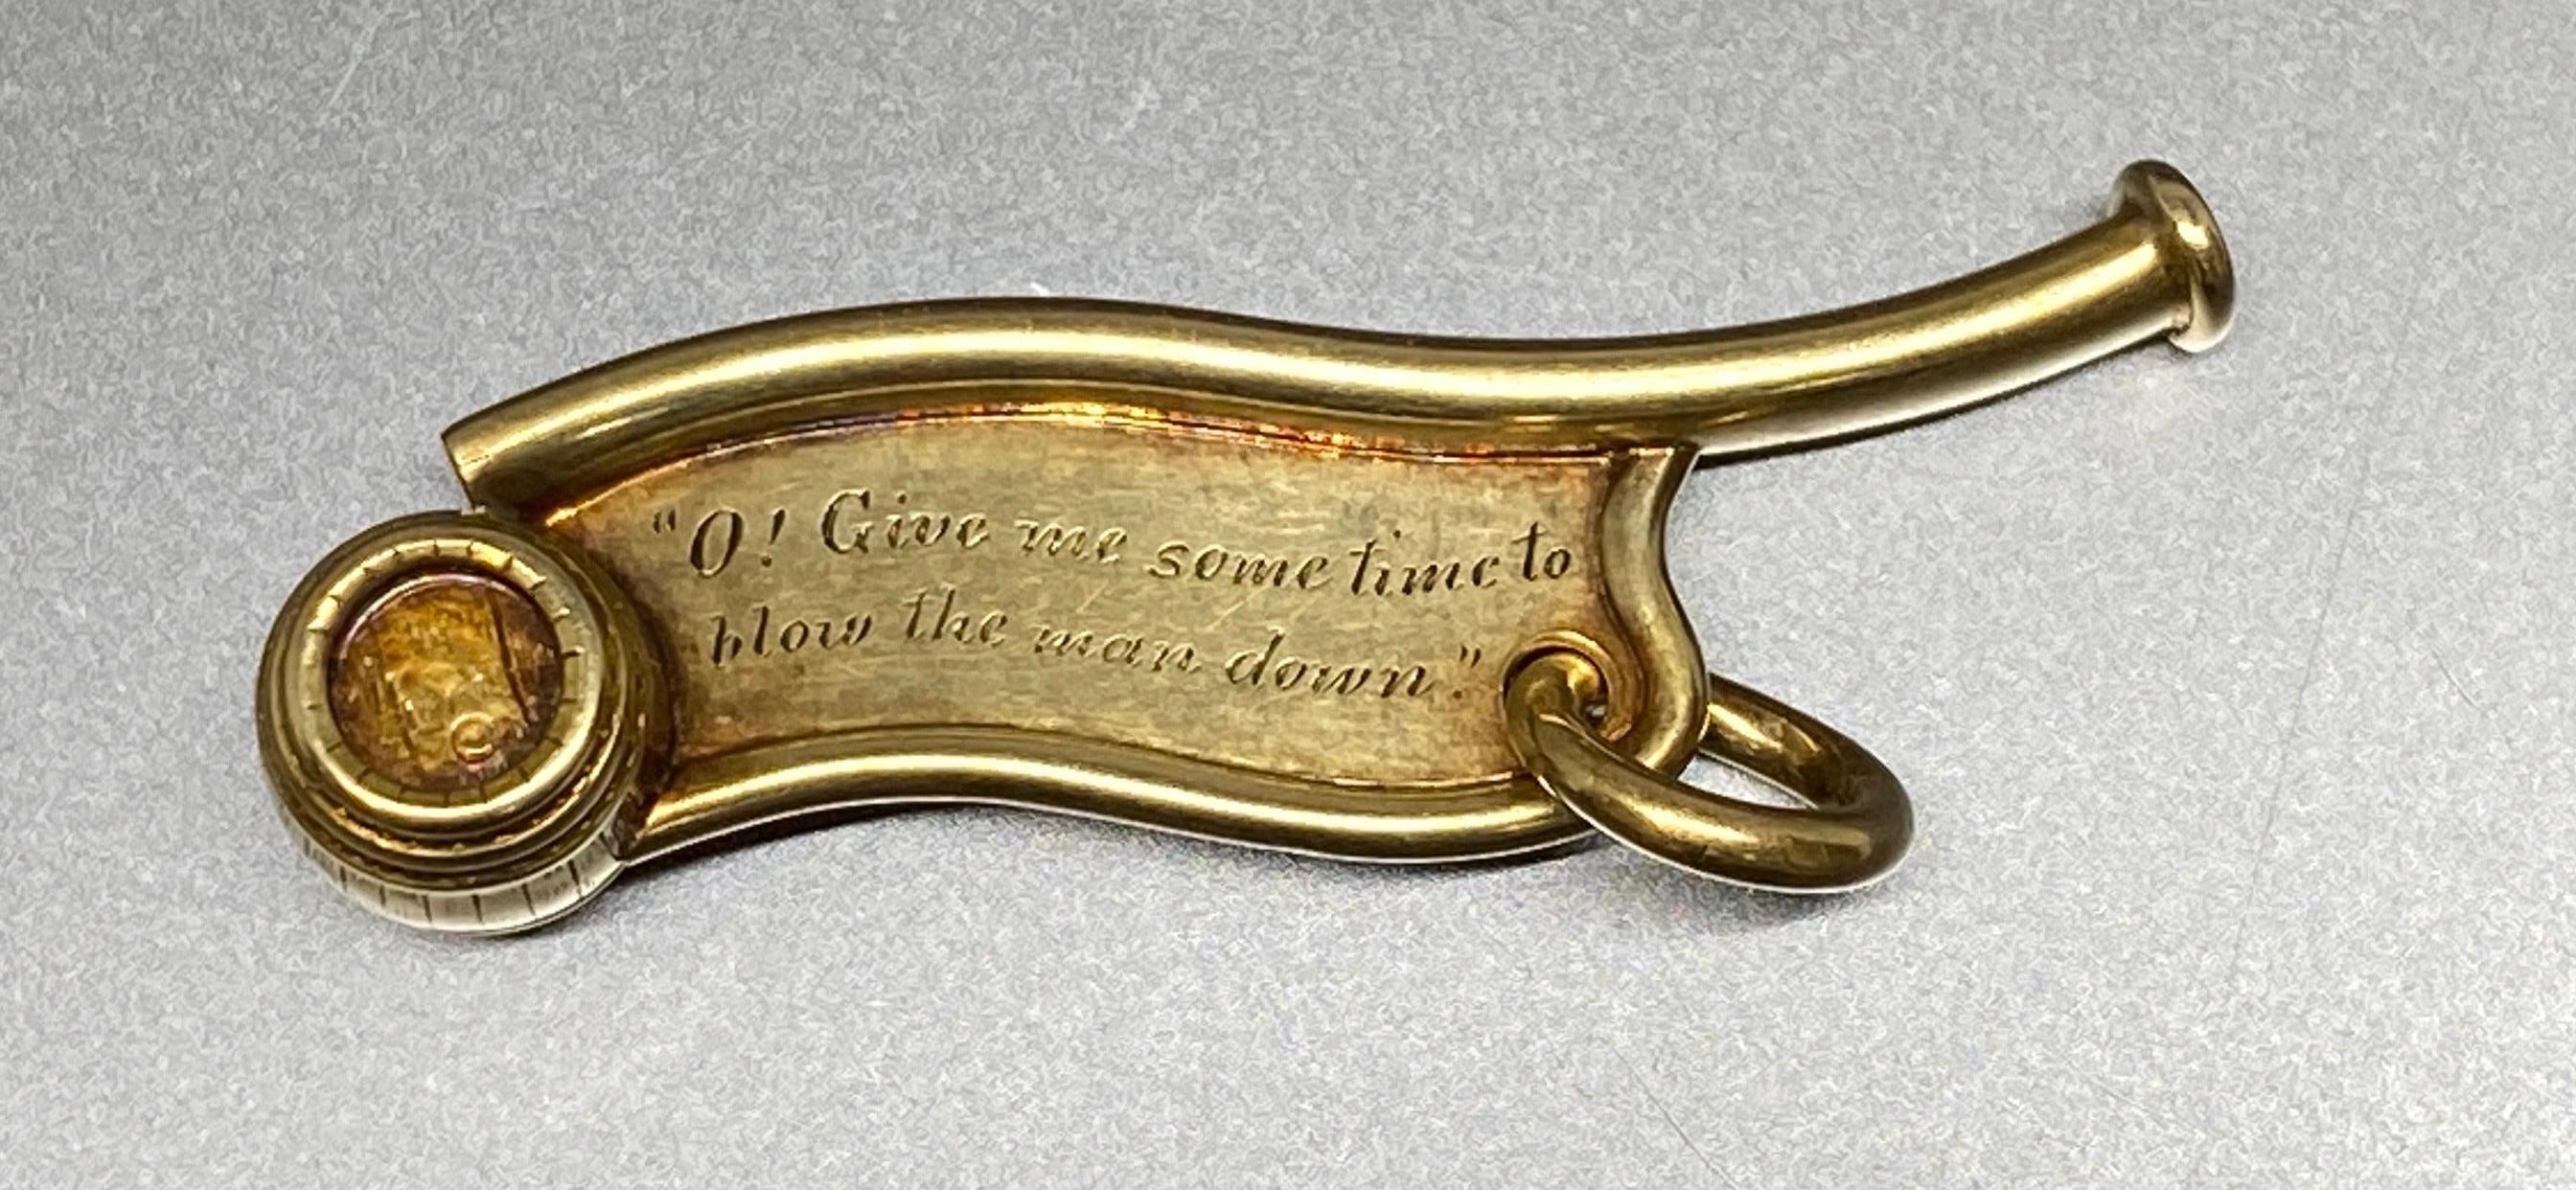 This is a very rare example of a solid gold 18k yellow gold bosun call or boatswain whistle made by Tiffany & Co.

A bosun or boatswain ranks as the top position or petty officer on the deck of a boat and these whistles were used to communicate to